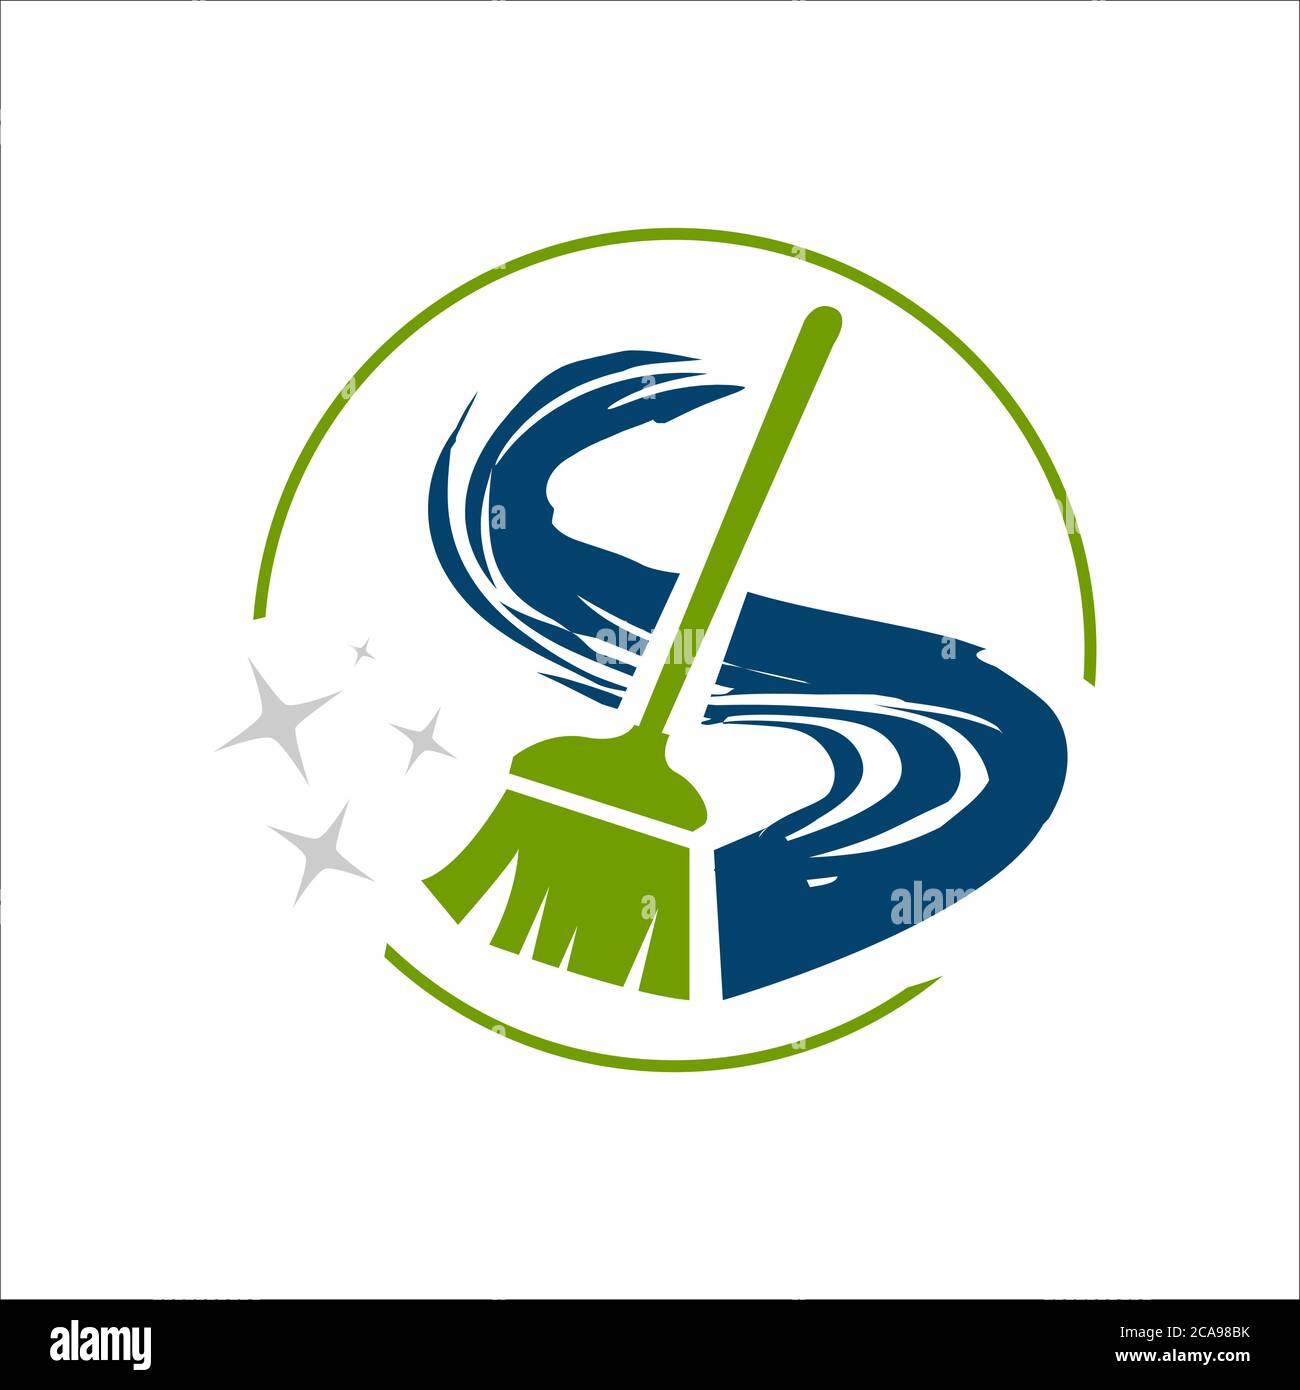 cleaning service logo